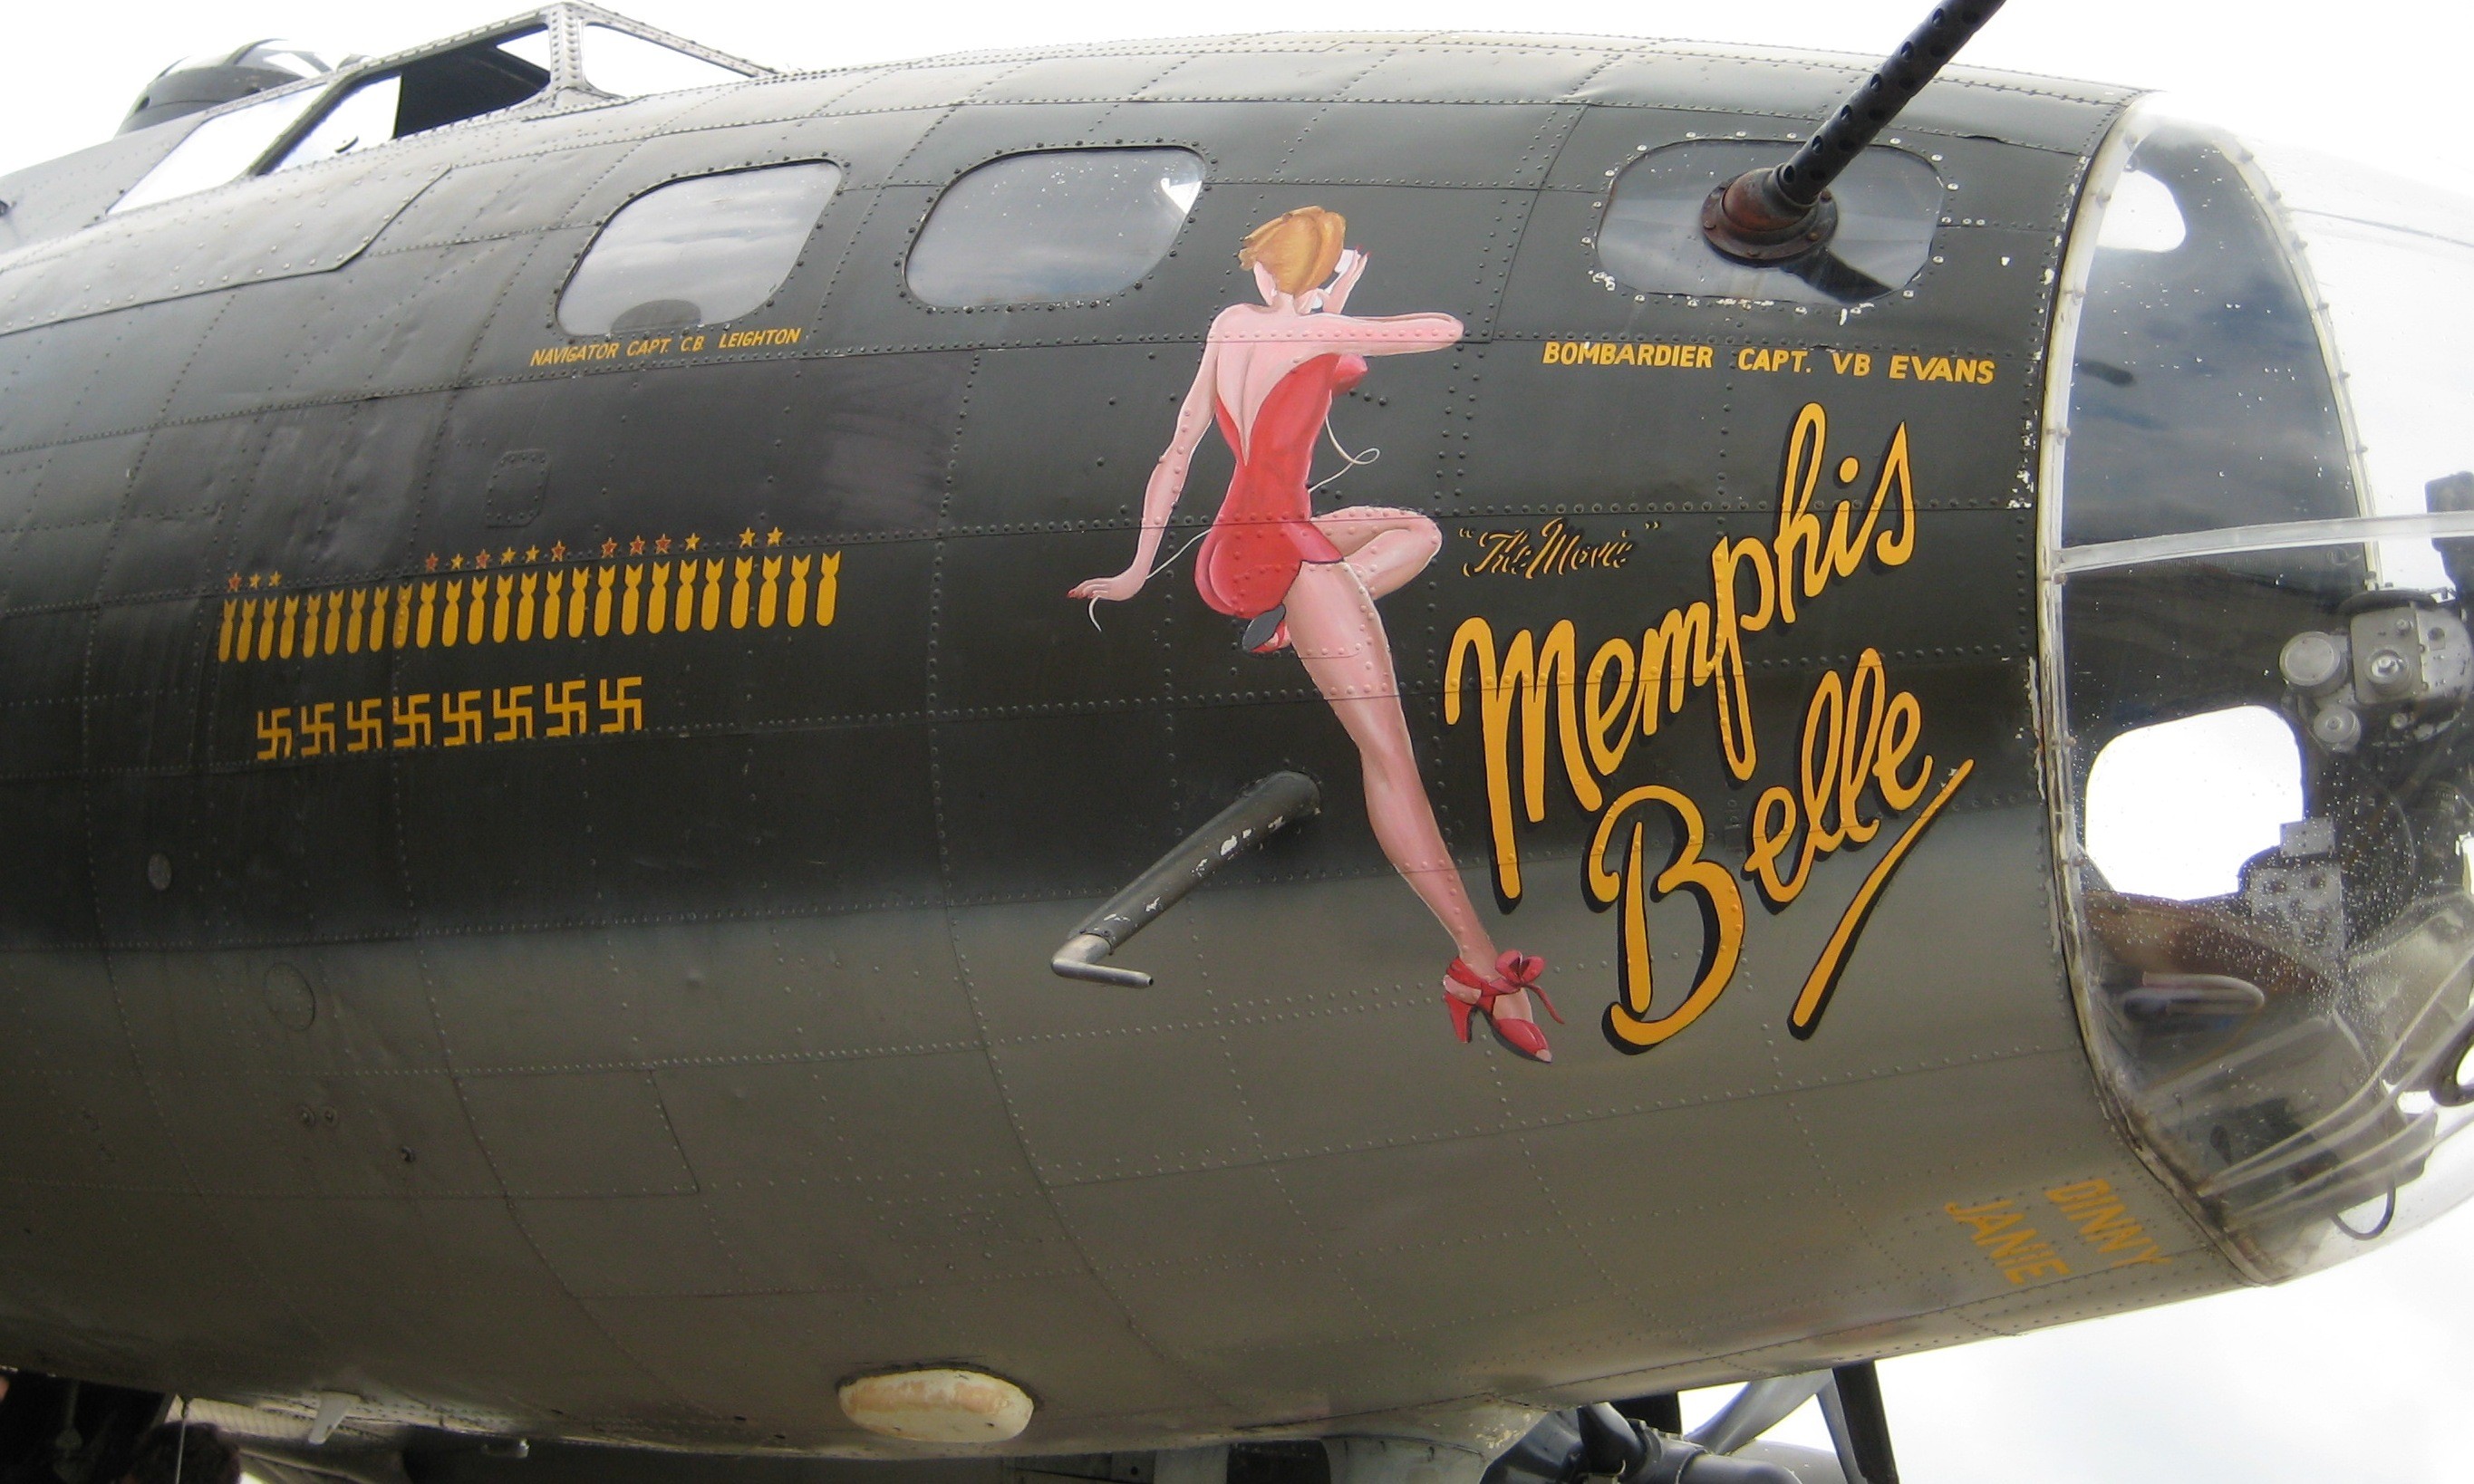 Memphis Belle" 360109 – is one of the top wallpapers in the Travel category.